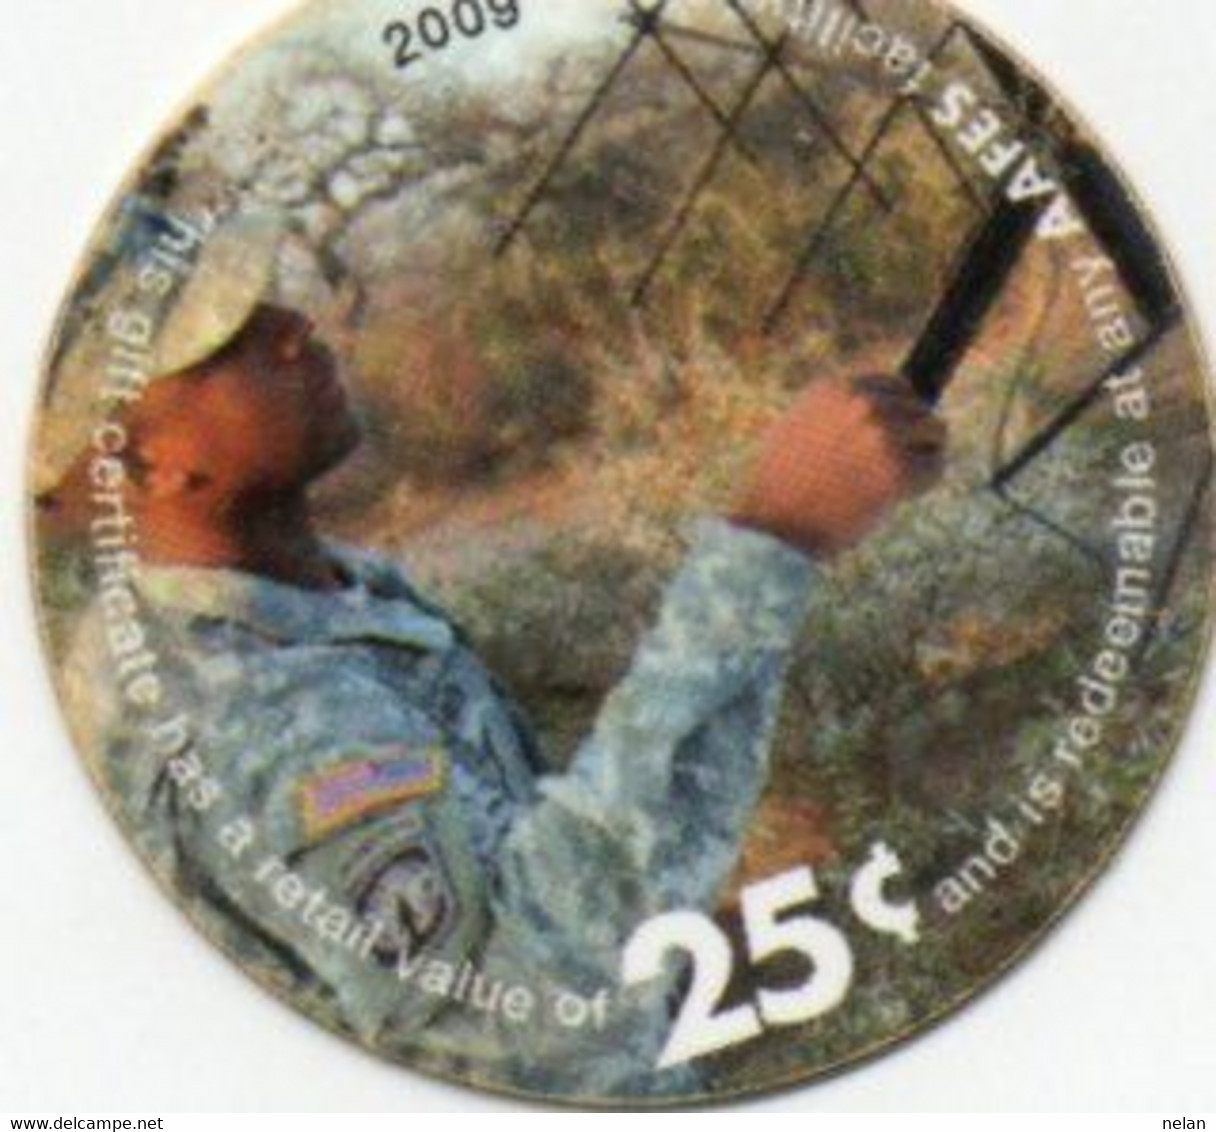 Stati Uniti D'America - 25 Cents - 2009  -Military Payment AAFES Certificates Series 13th Issue -Wor:P-M516 - Plastic - Series 701